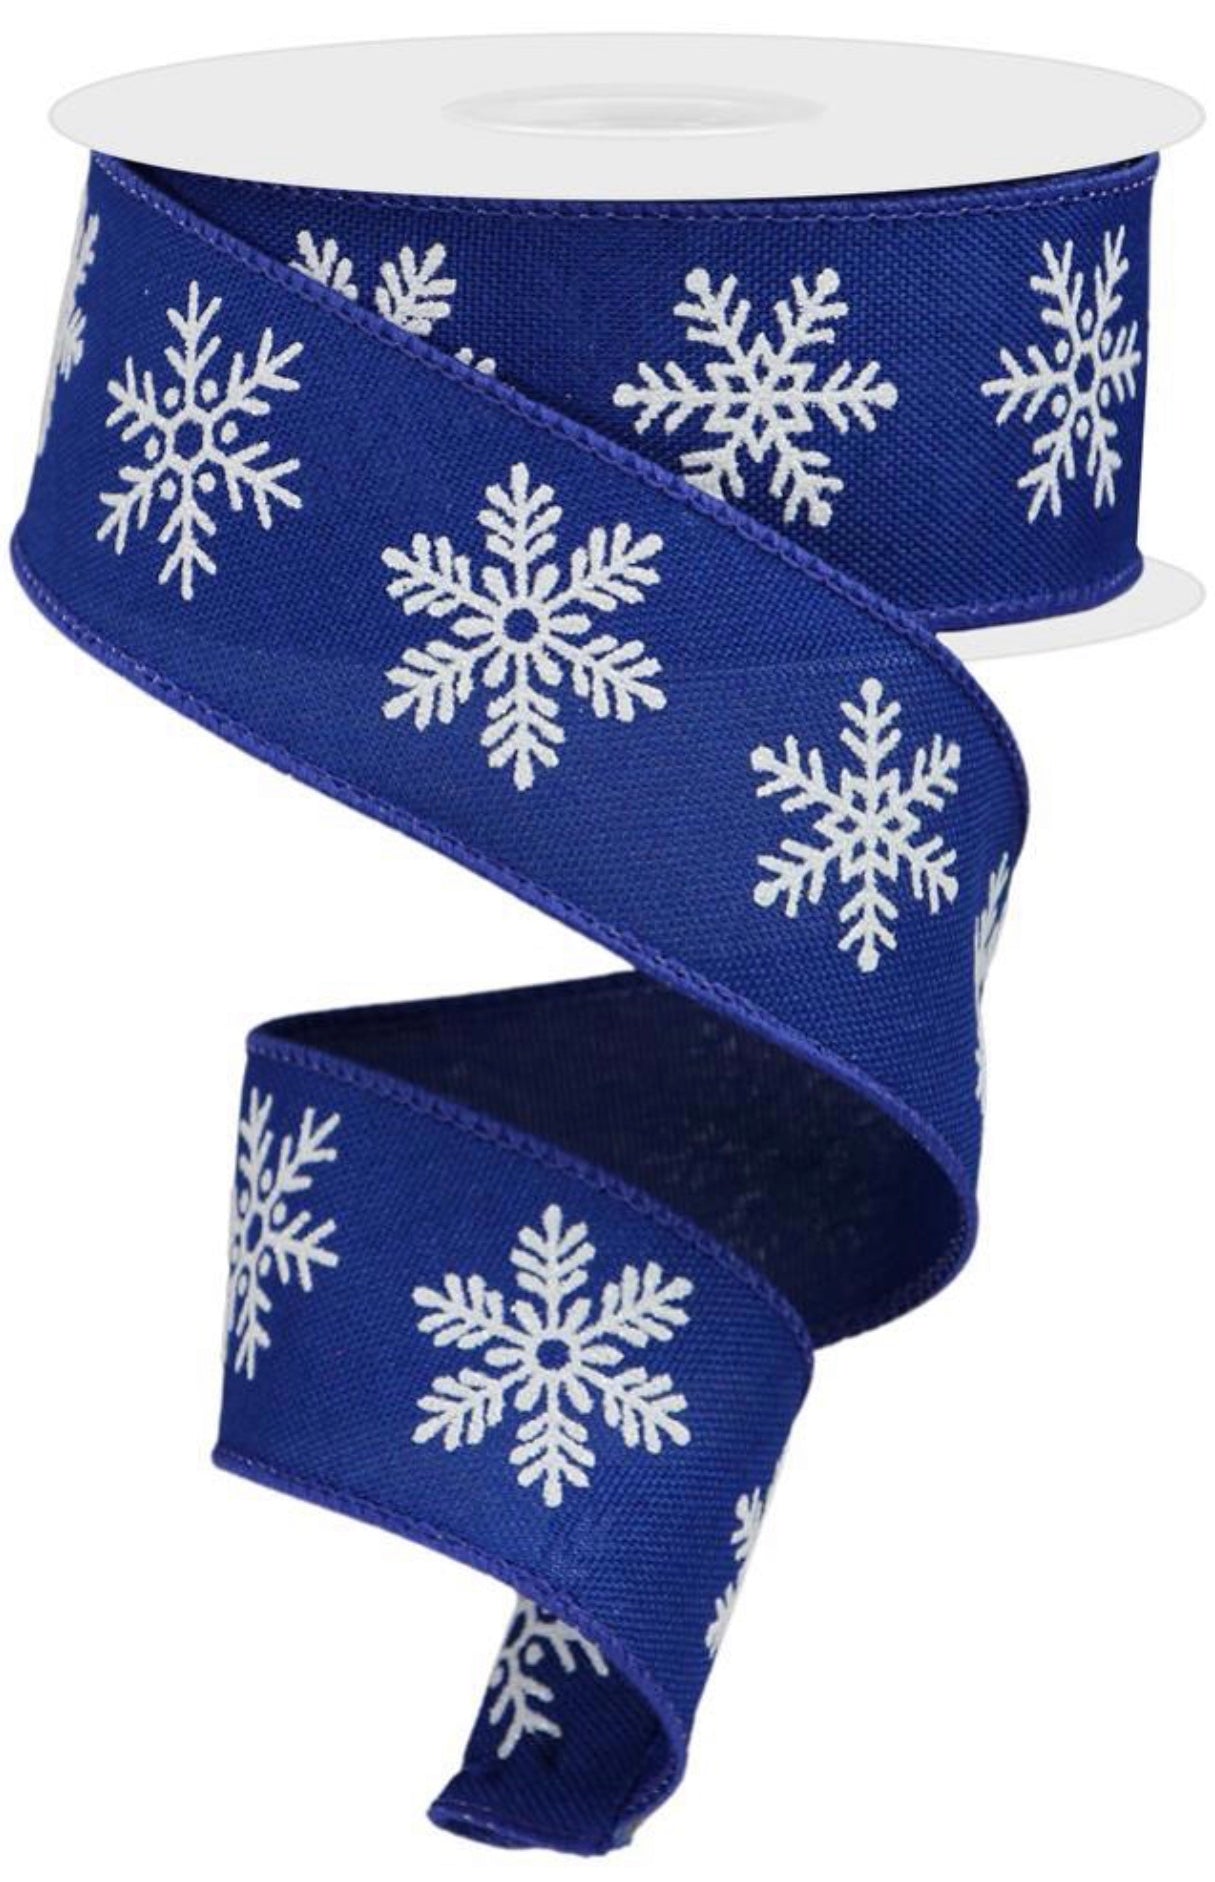 10 Yards - 1.5” Wired Royal Blue and White Glitter Snowflake Ribbon